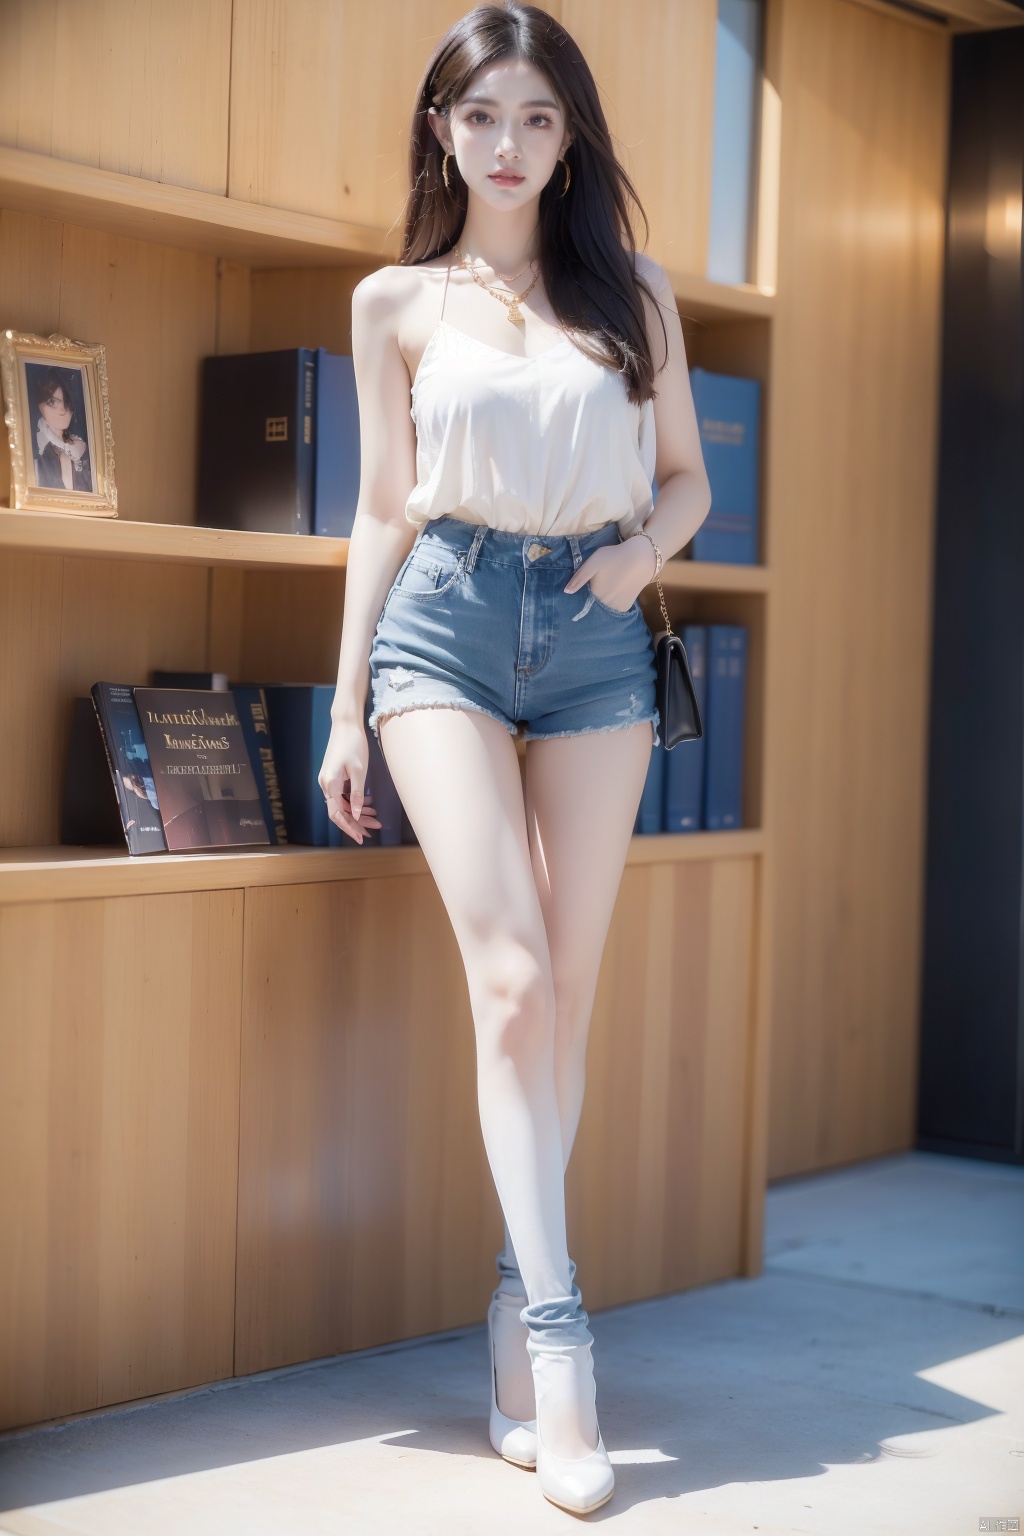 80sDBA style, fashionable, best quality, masterpiece, high-resolution, 4K, 1 girl, ultimate face, exquisite makeup, fluffy hair, black pantyhose, mesh socks, ripped jeans, pants, sparkling stars, (long legs: 1.5), necklace, earrings, high heels, bookshelf, long_hair, yunv, dlrb, yacht deck landscape